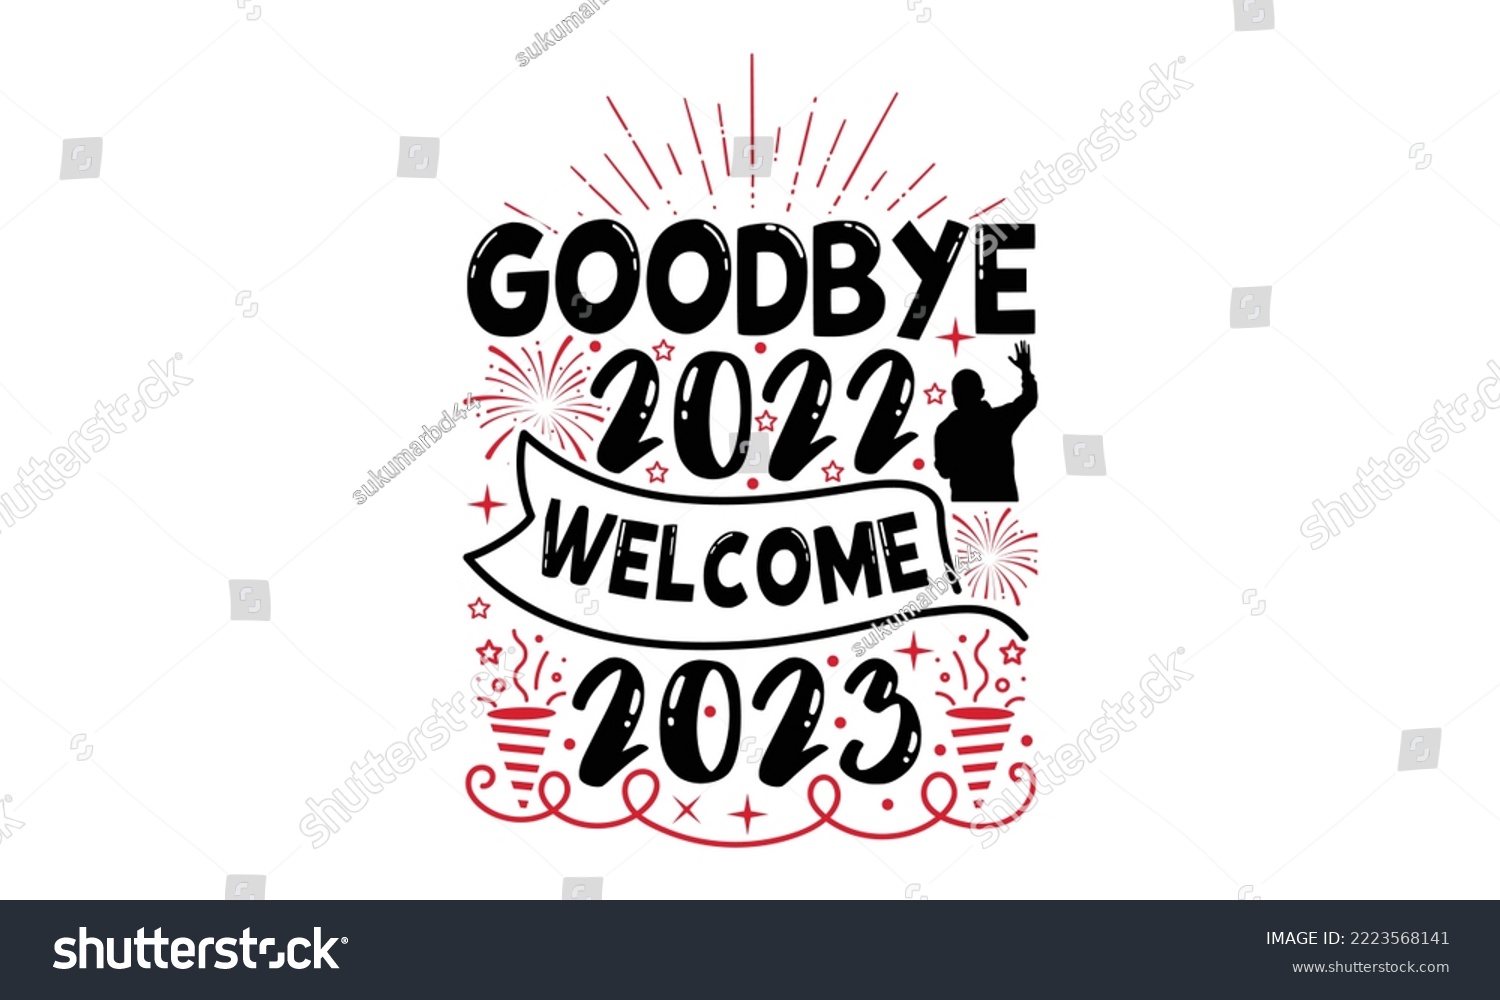 SVG of Goodbye 2022 Welcome 2023 - Happy New Year SVG Design, Hand drawn lettering phrase isolated on white background, Calligraphy T-shirt design, EPS, SVG Files for Cutting, bag, cups, card svg